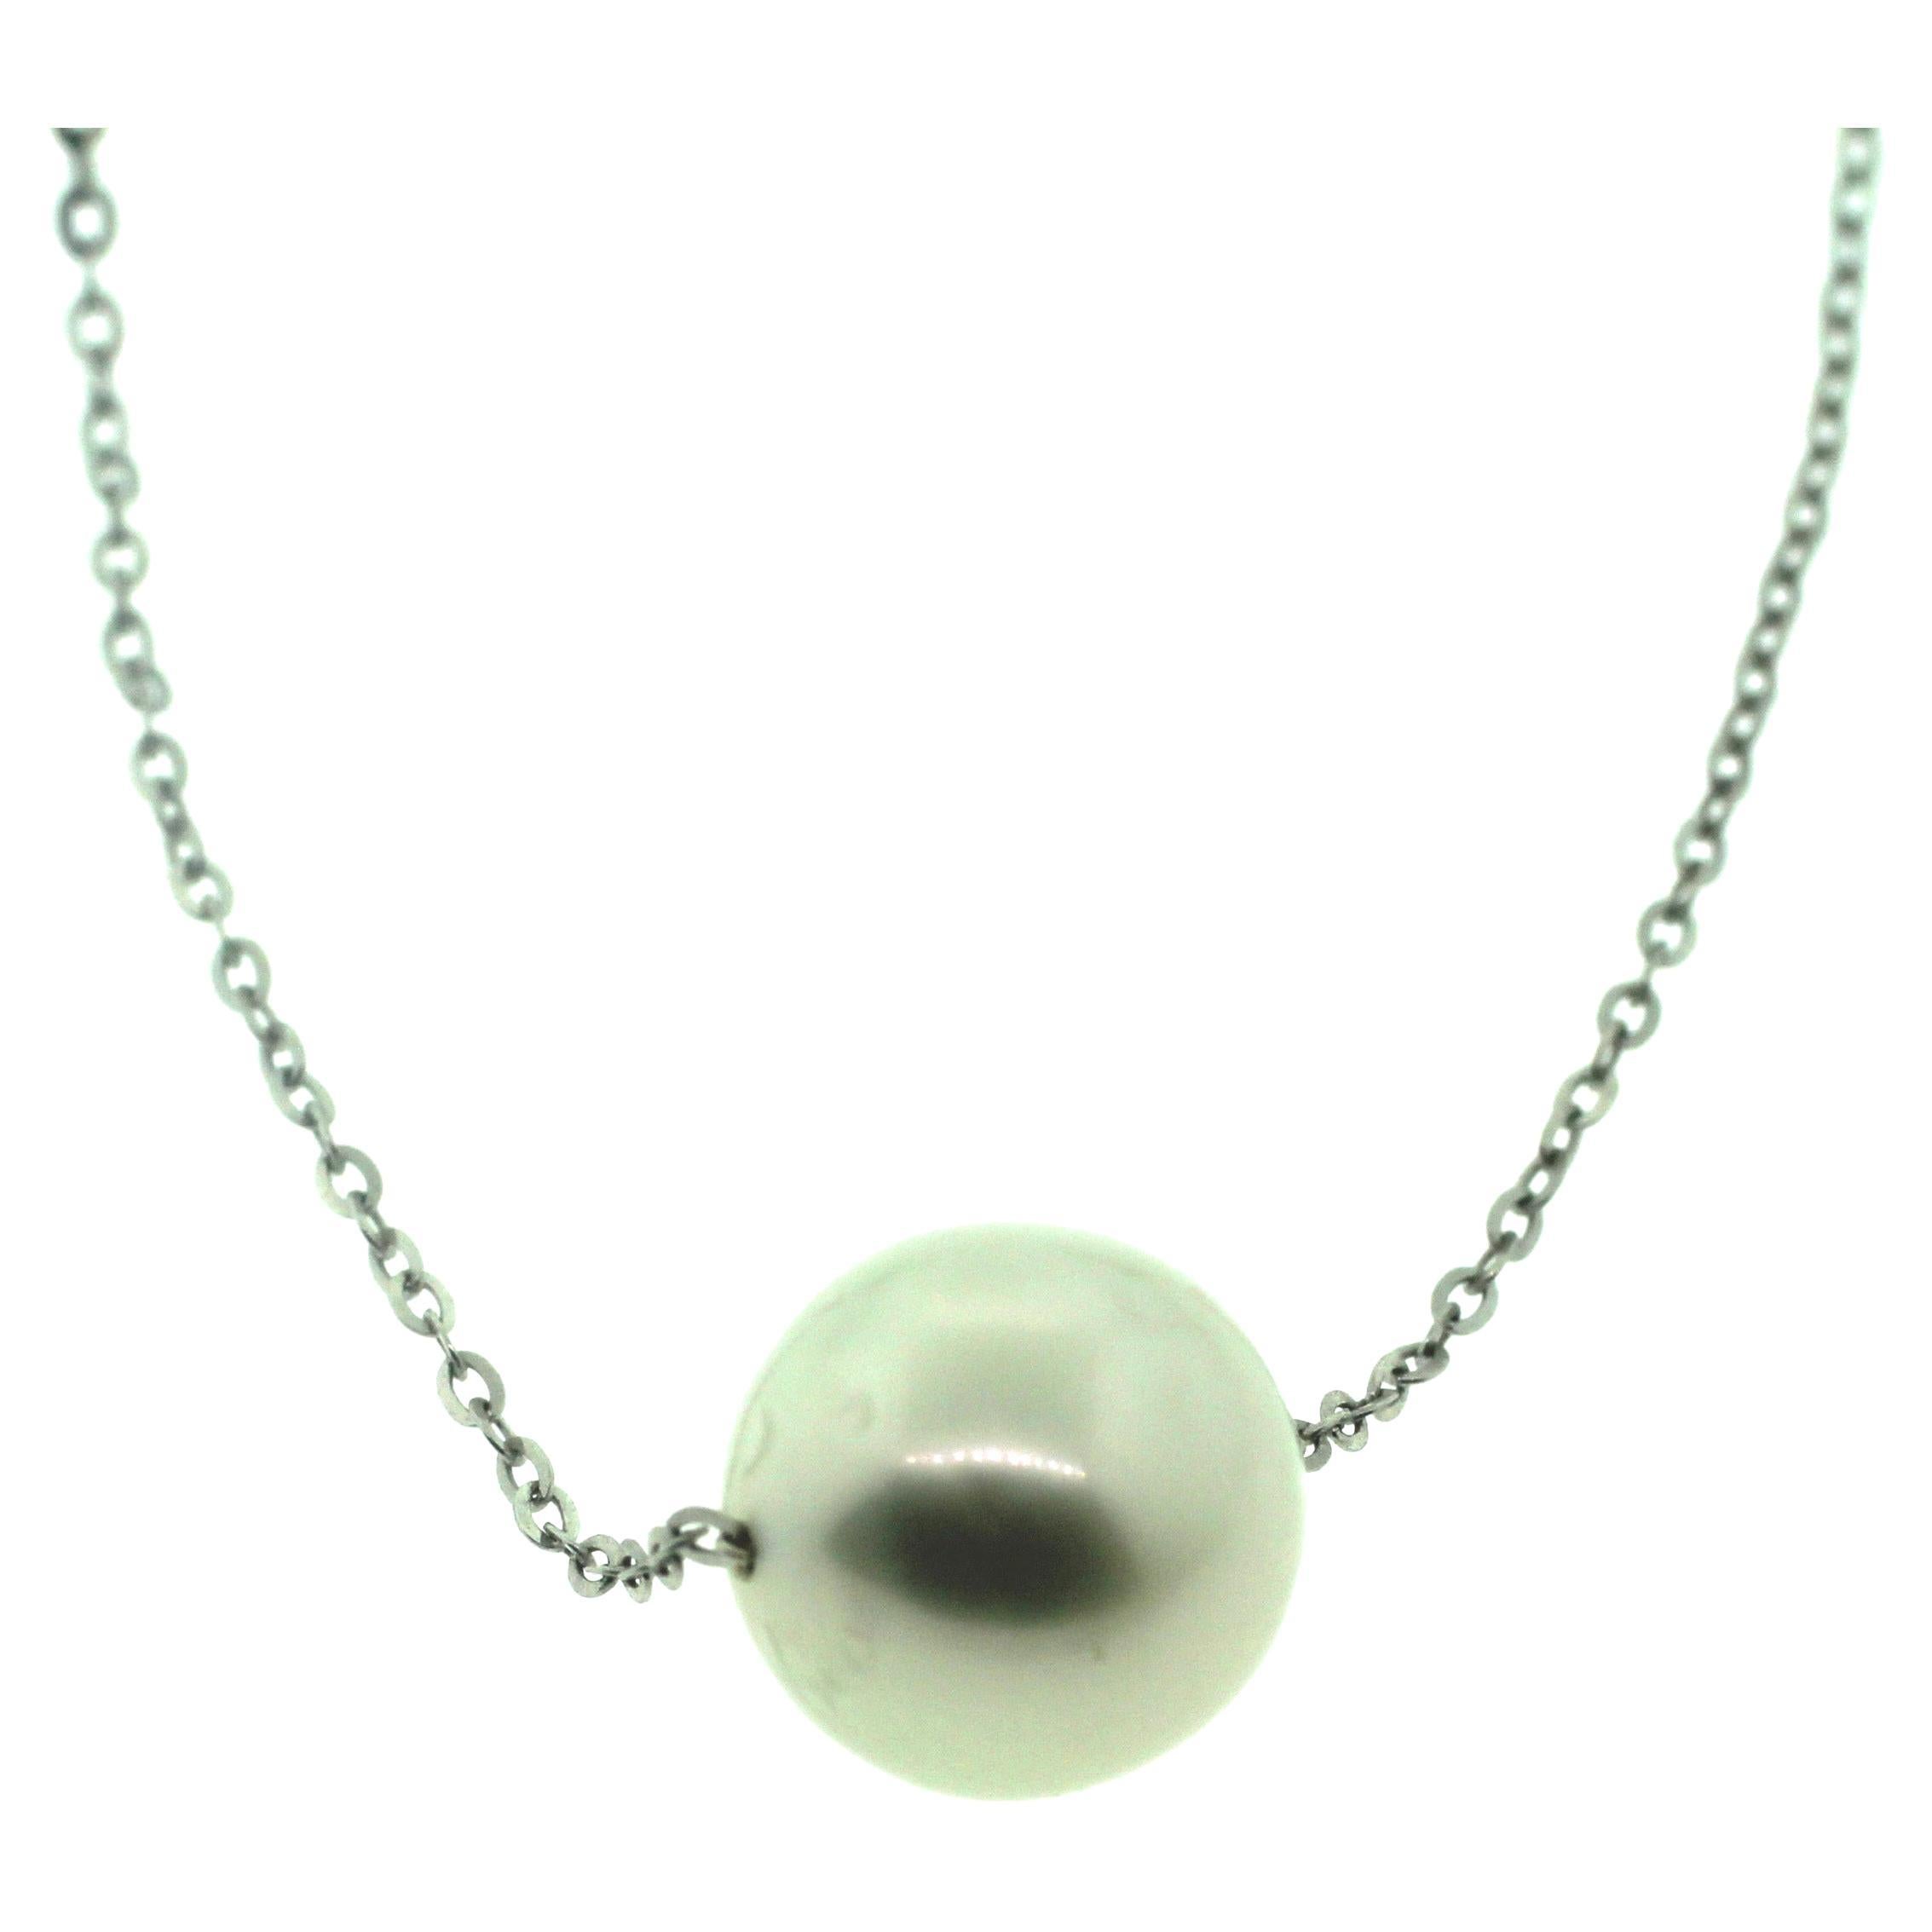 Hakimoto By Jewel Of Ocean Station Necklace
A classic and wearable South Sea Station pearl necklace. 
The necklace is Made with 5 Baroque South Sea Pearls size 10-11mm. 
The pearls are connected by 18 karat gold 
It is Modern And Classic Style
The